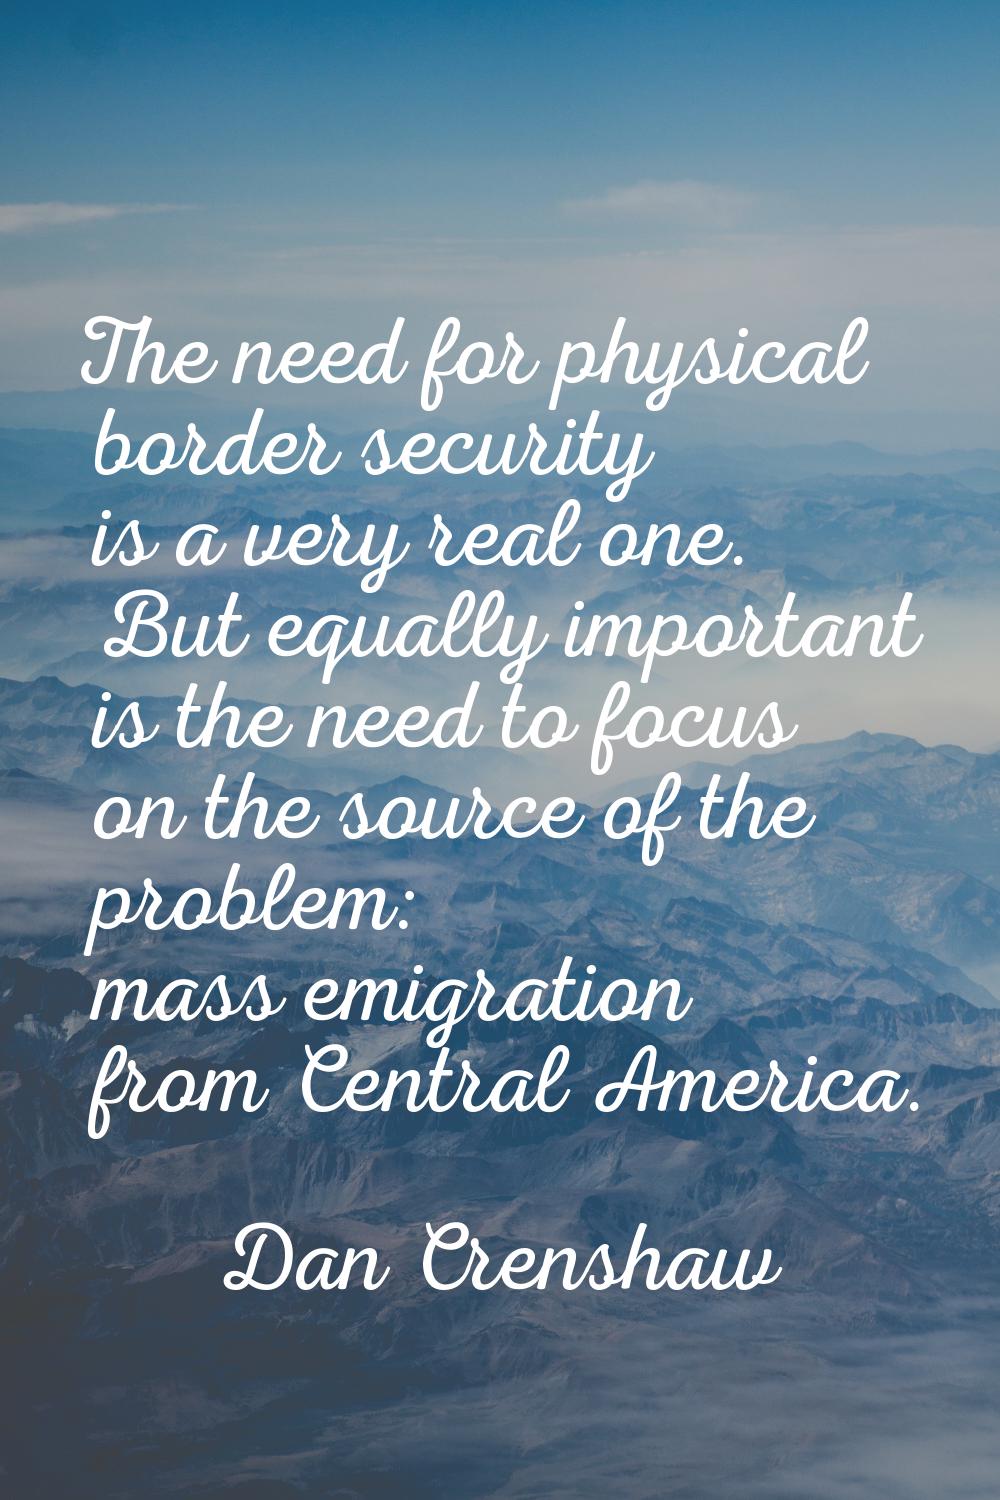 The need for physical border security is a very real one. But equally important is the need to focu